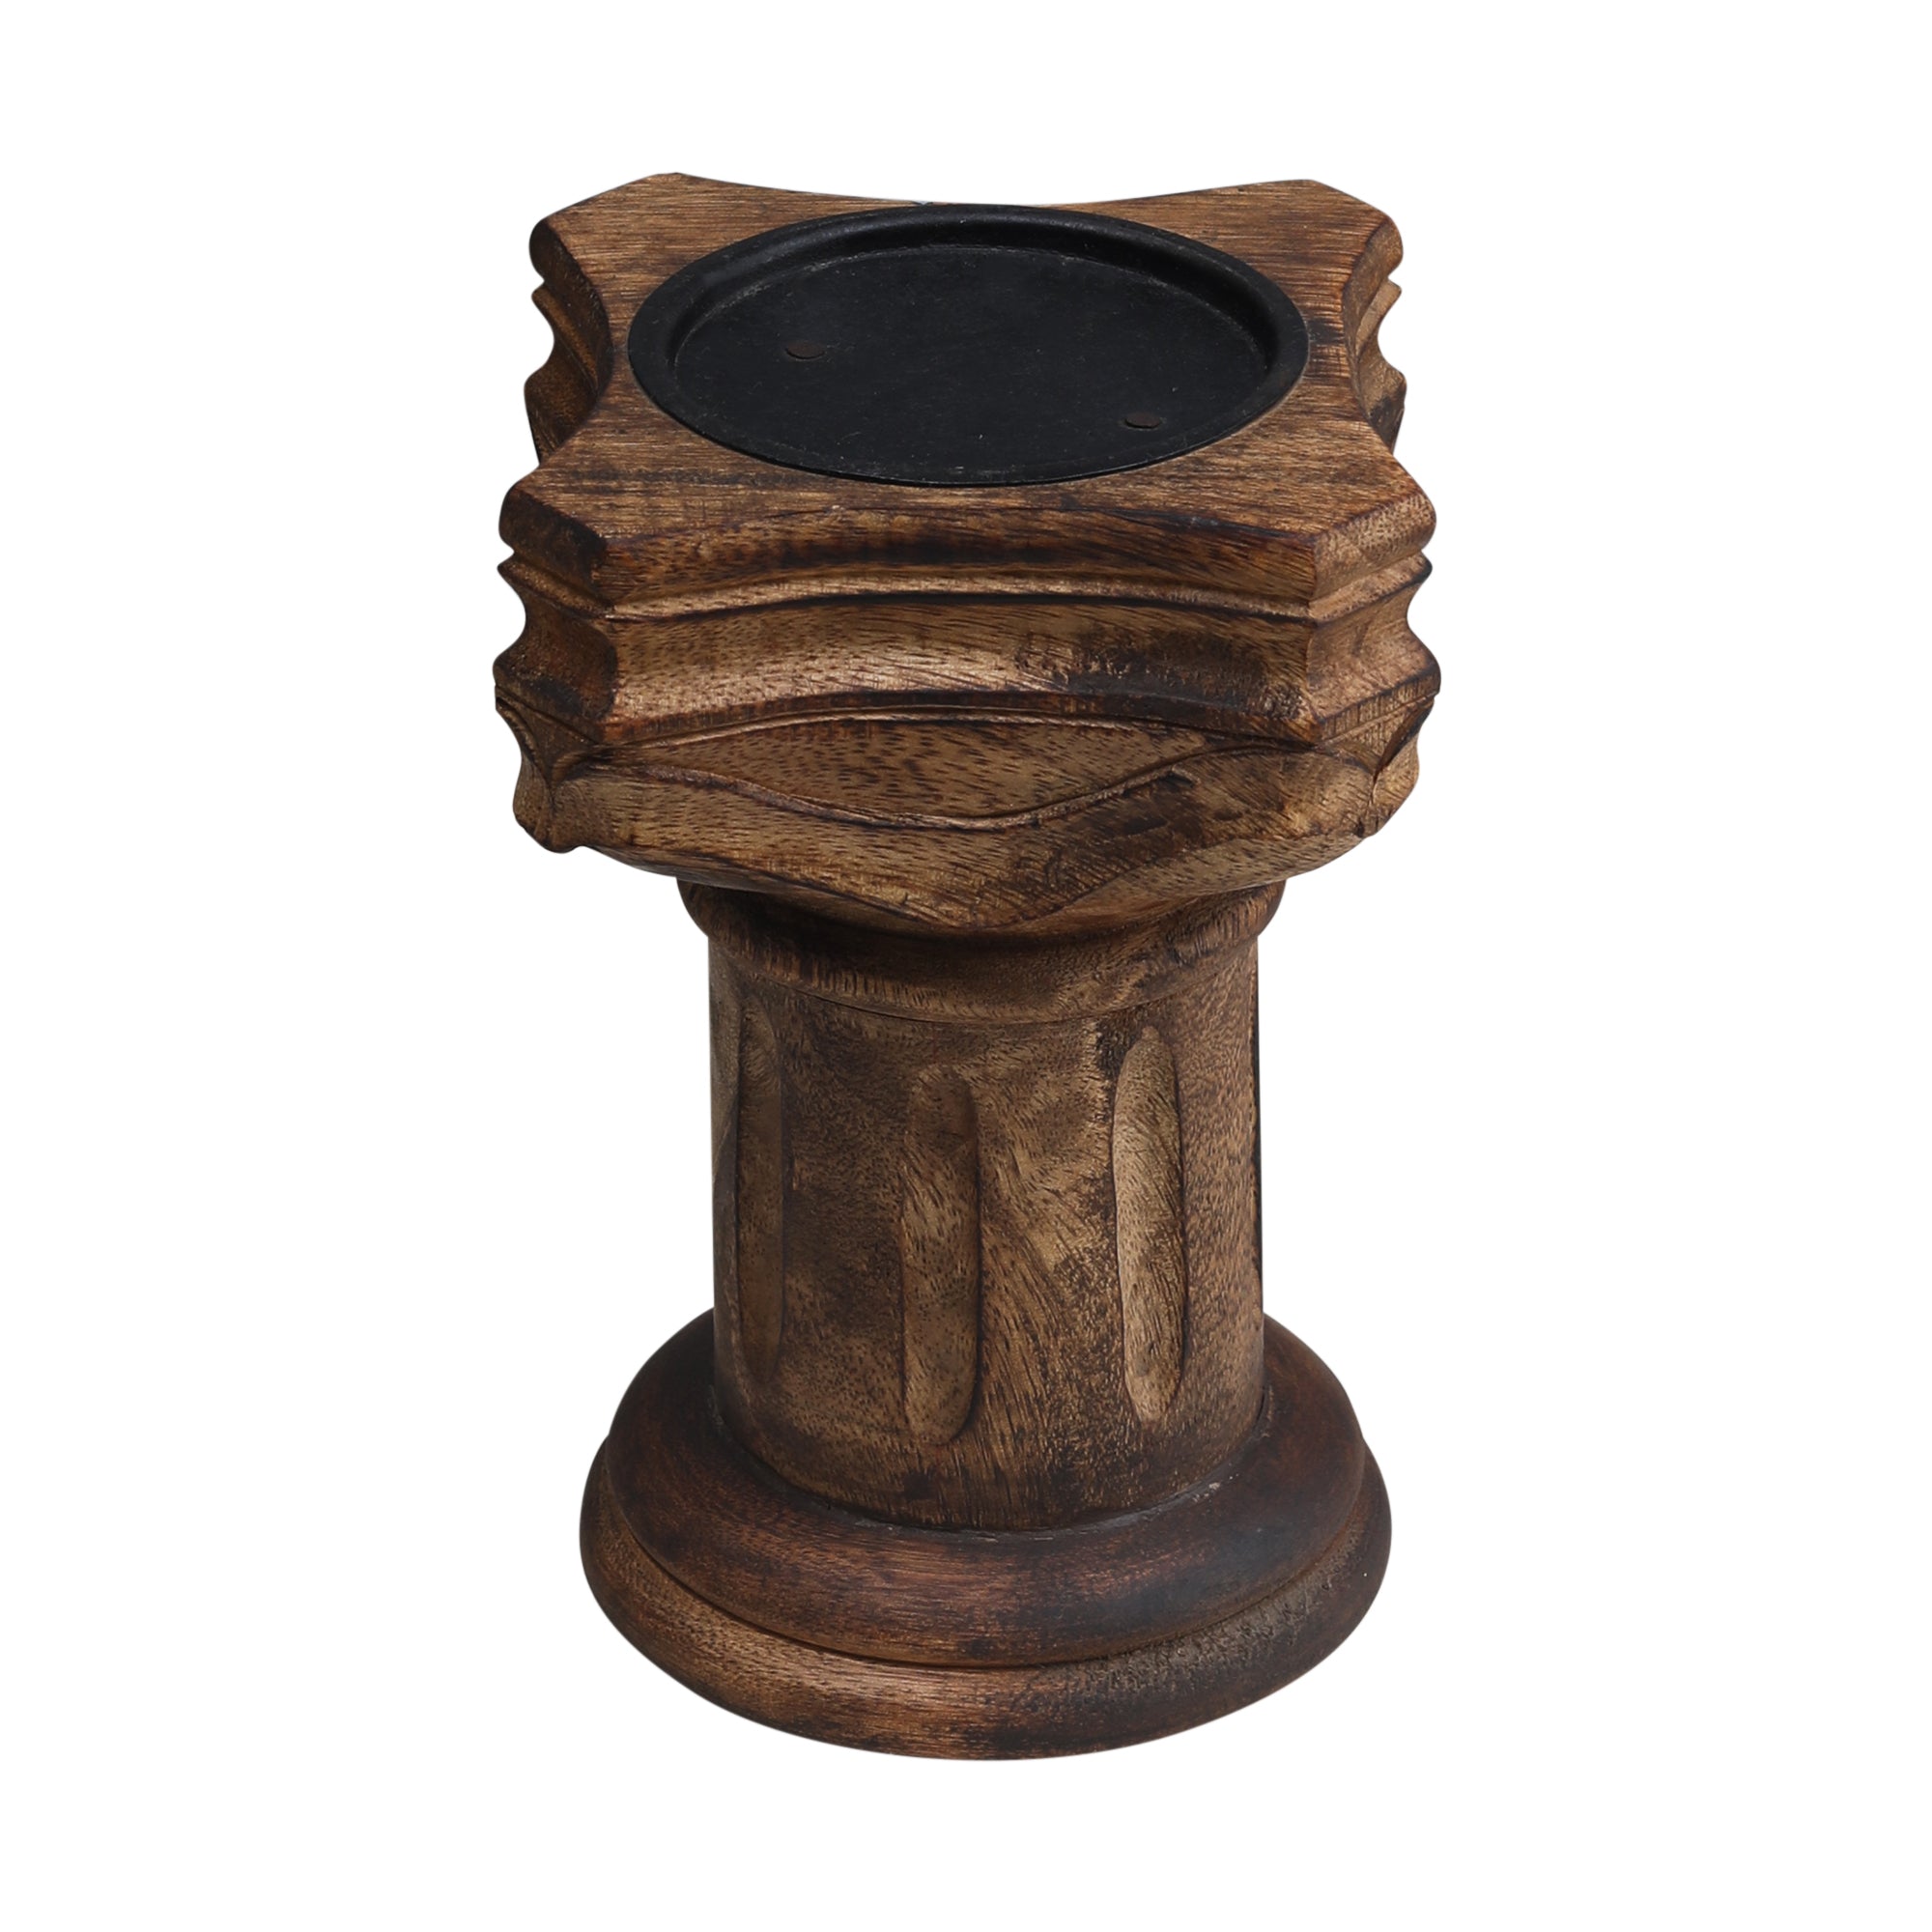 The Rook - Handcarved Candle Stand